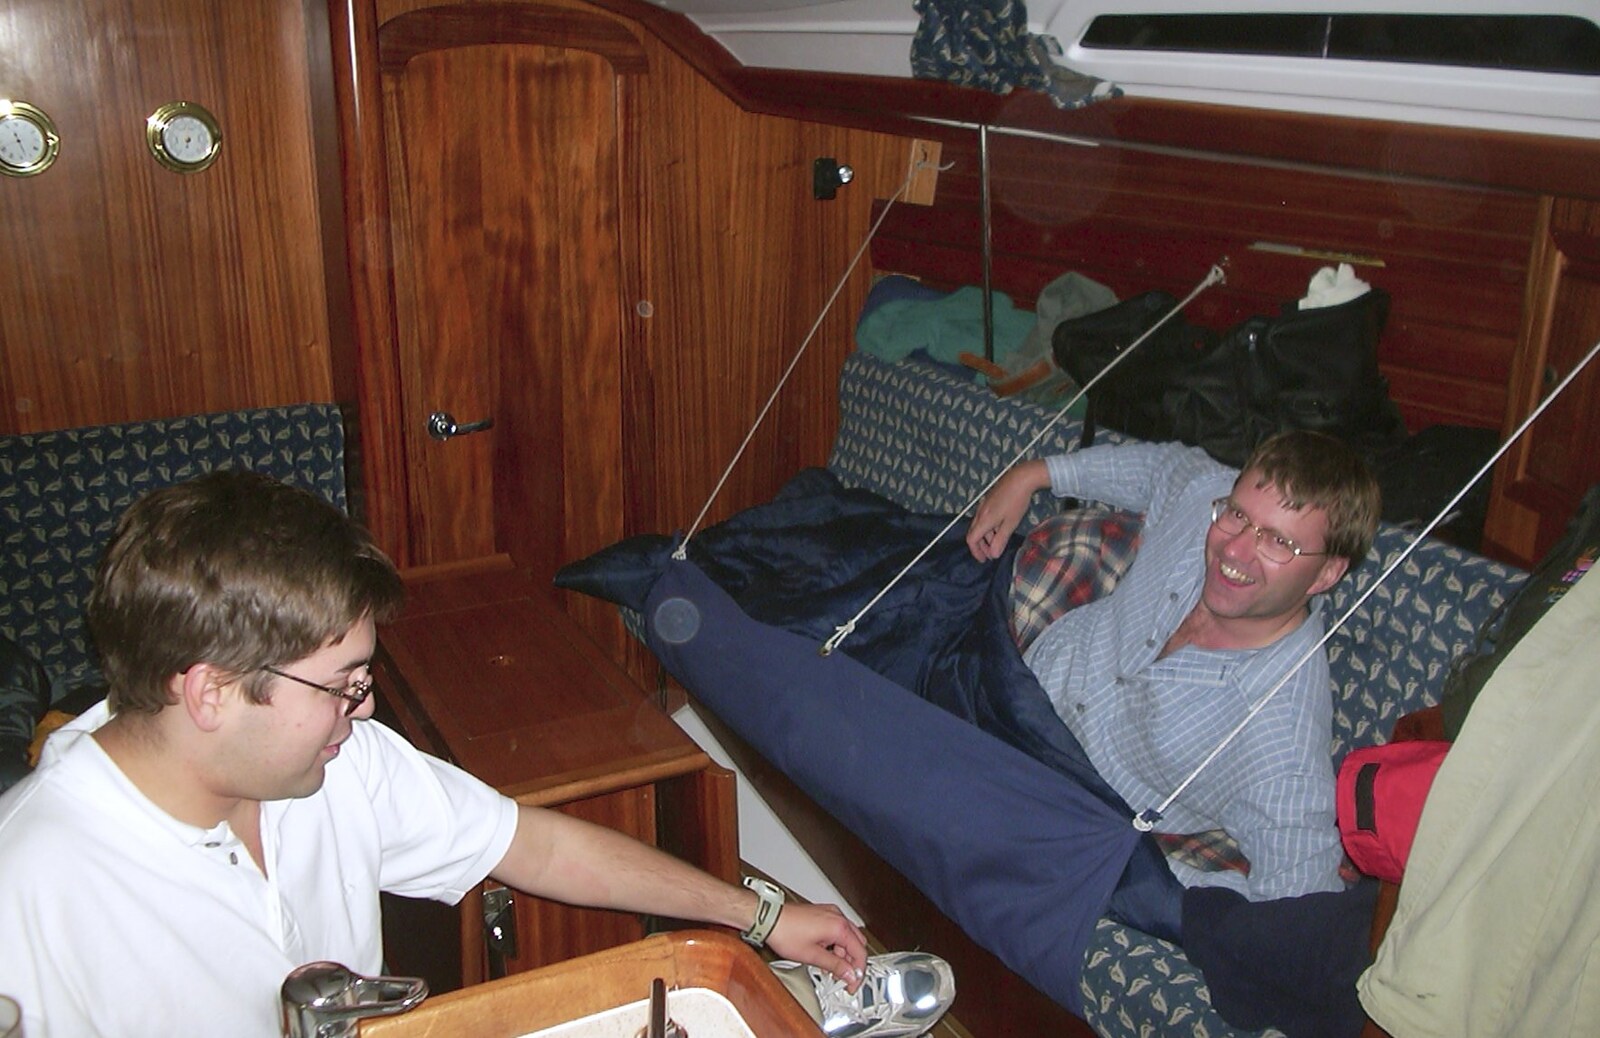 Paul beds down for the night from A 3G Lab Sailing Trip, Shotley, Suffolk - 6th September 2001